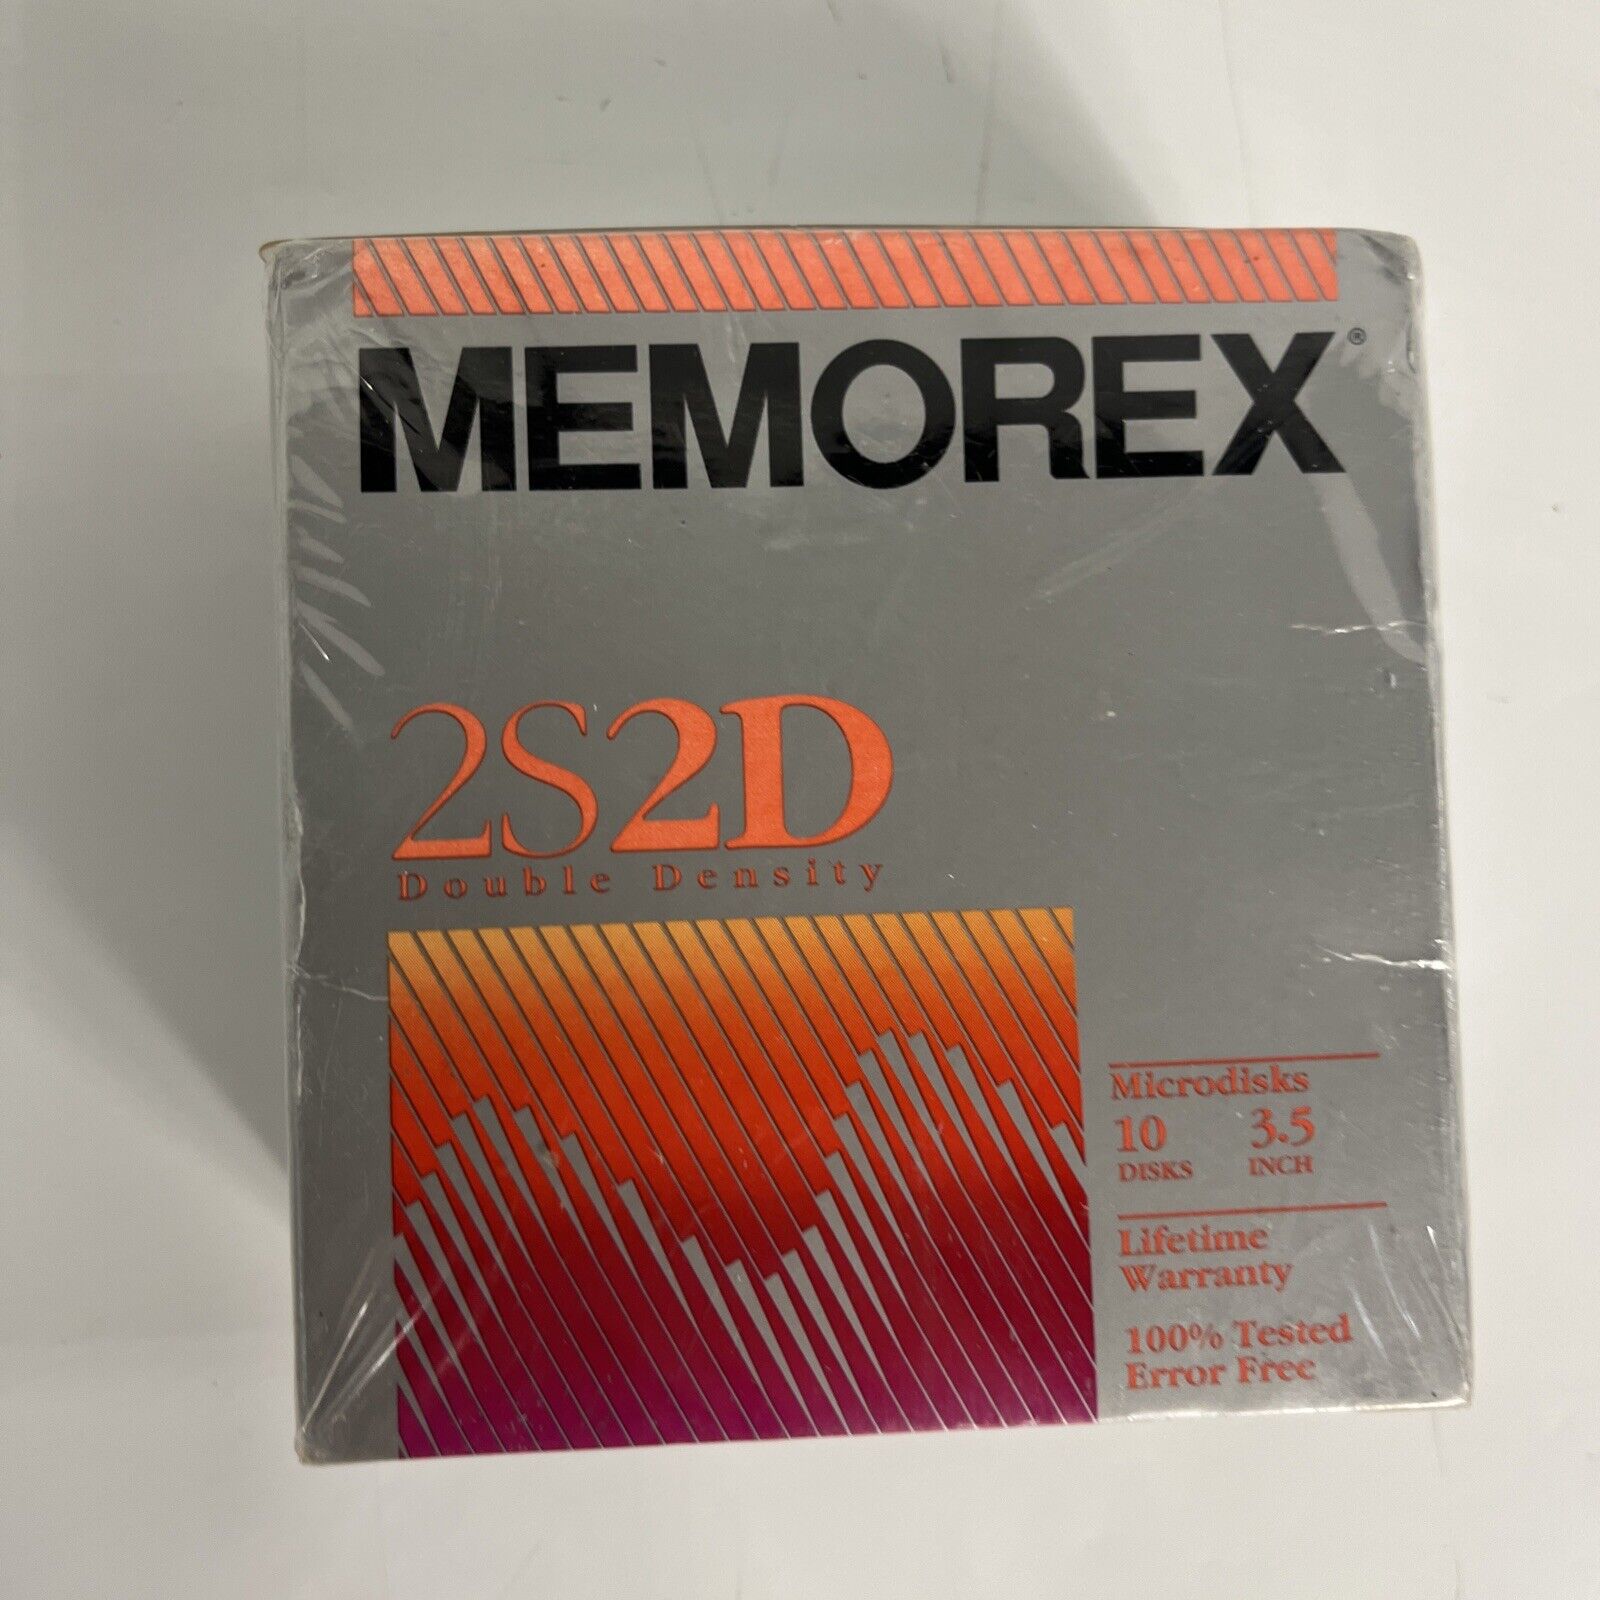 Memorex 2S/2D Double Sided Double Density 3 1/2 Inch Microdisks • 1 Box of 10